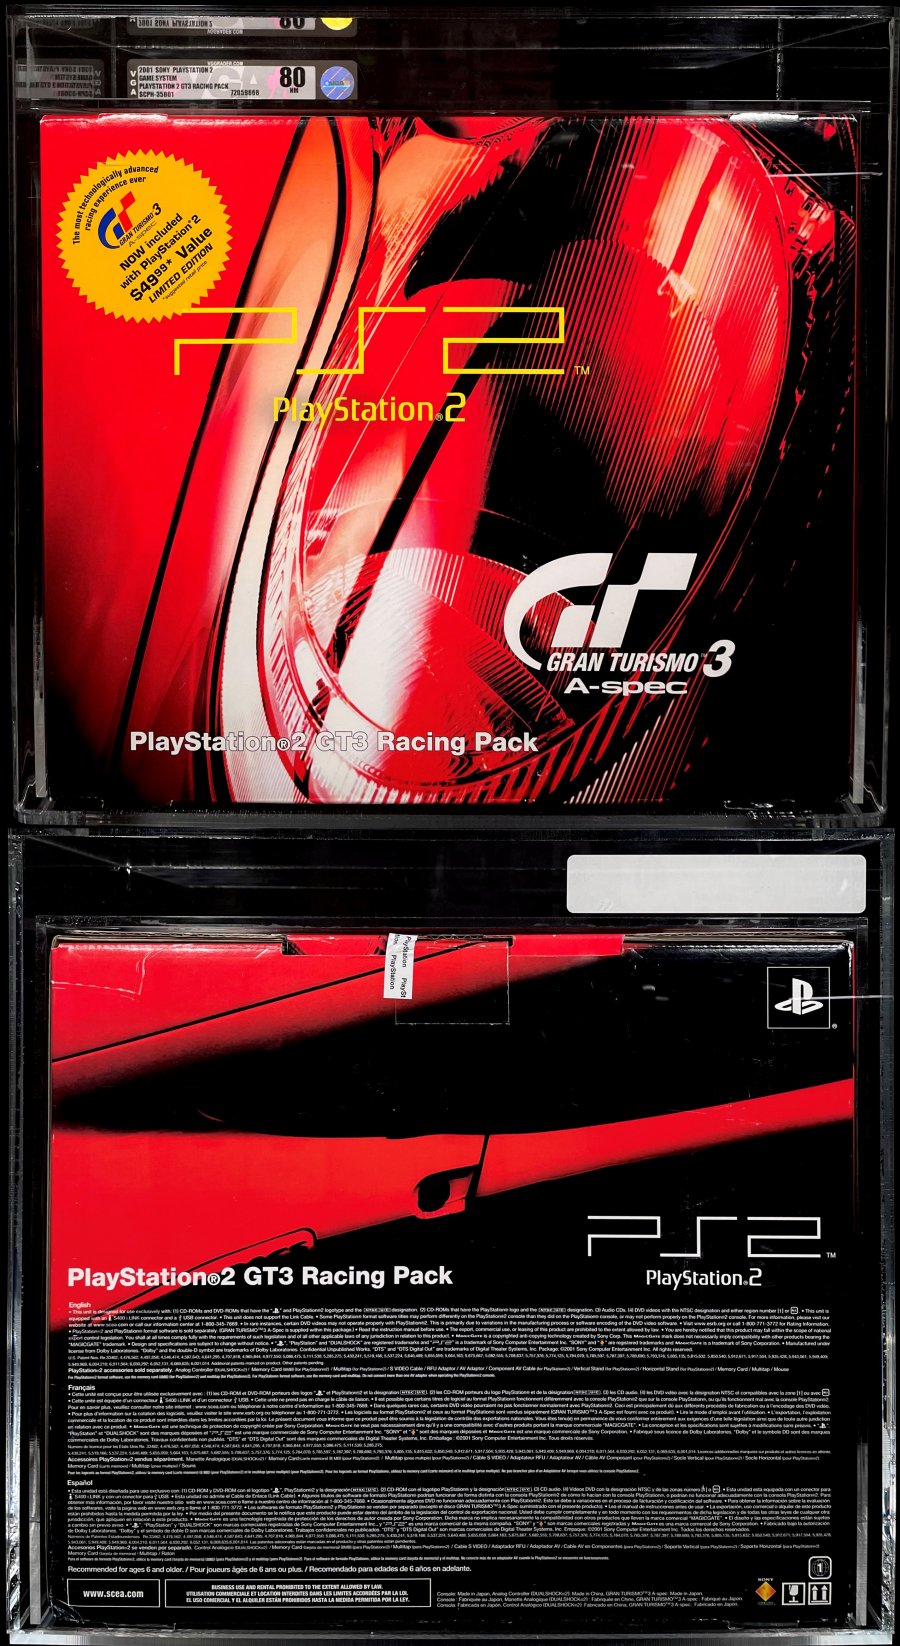 ComicConnect - SONY PLAYSTATION 2 GT3 RACING PACK CONSOLE(PS2